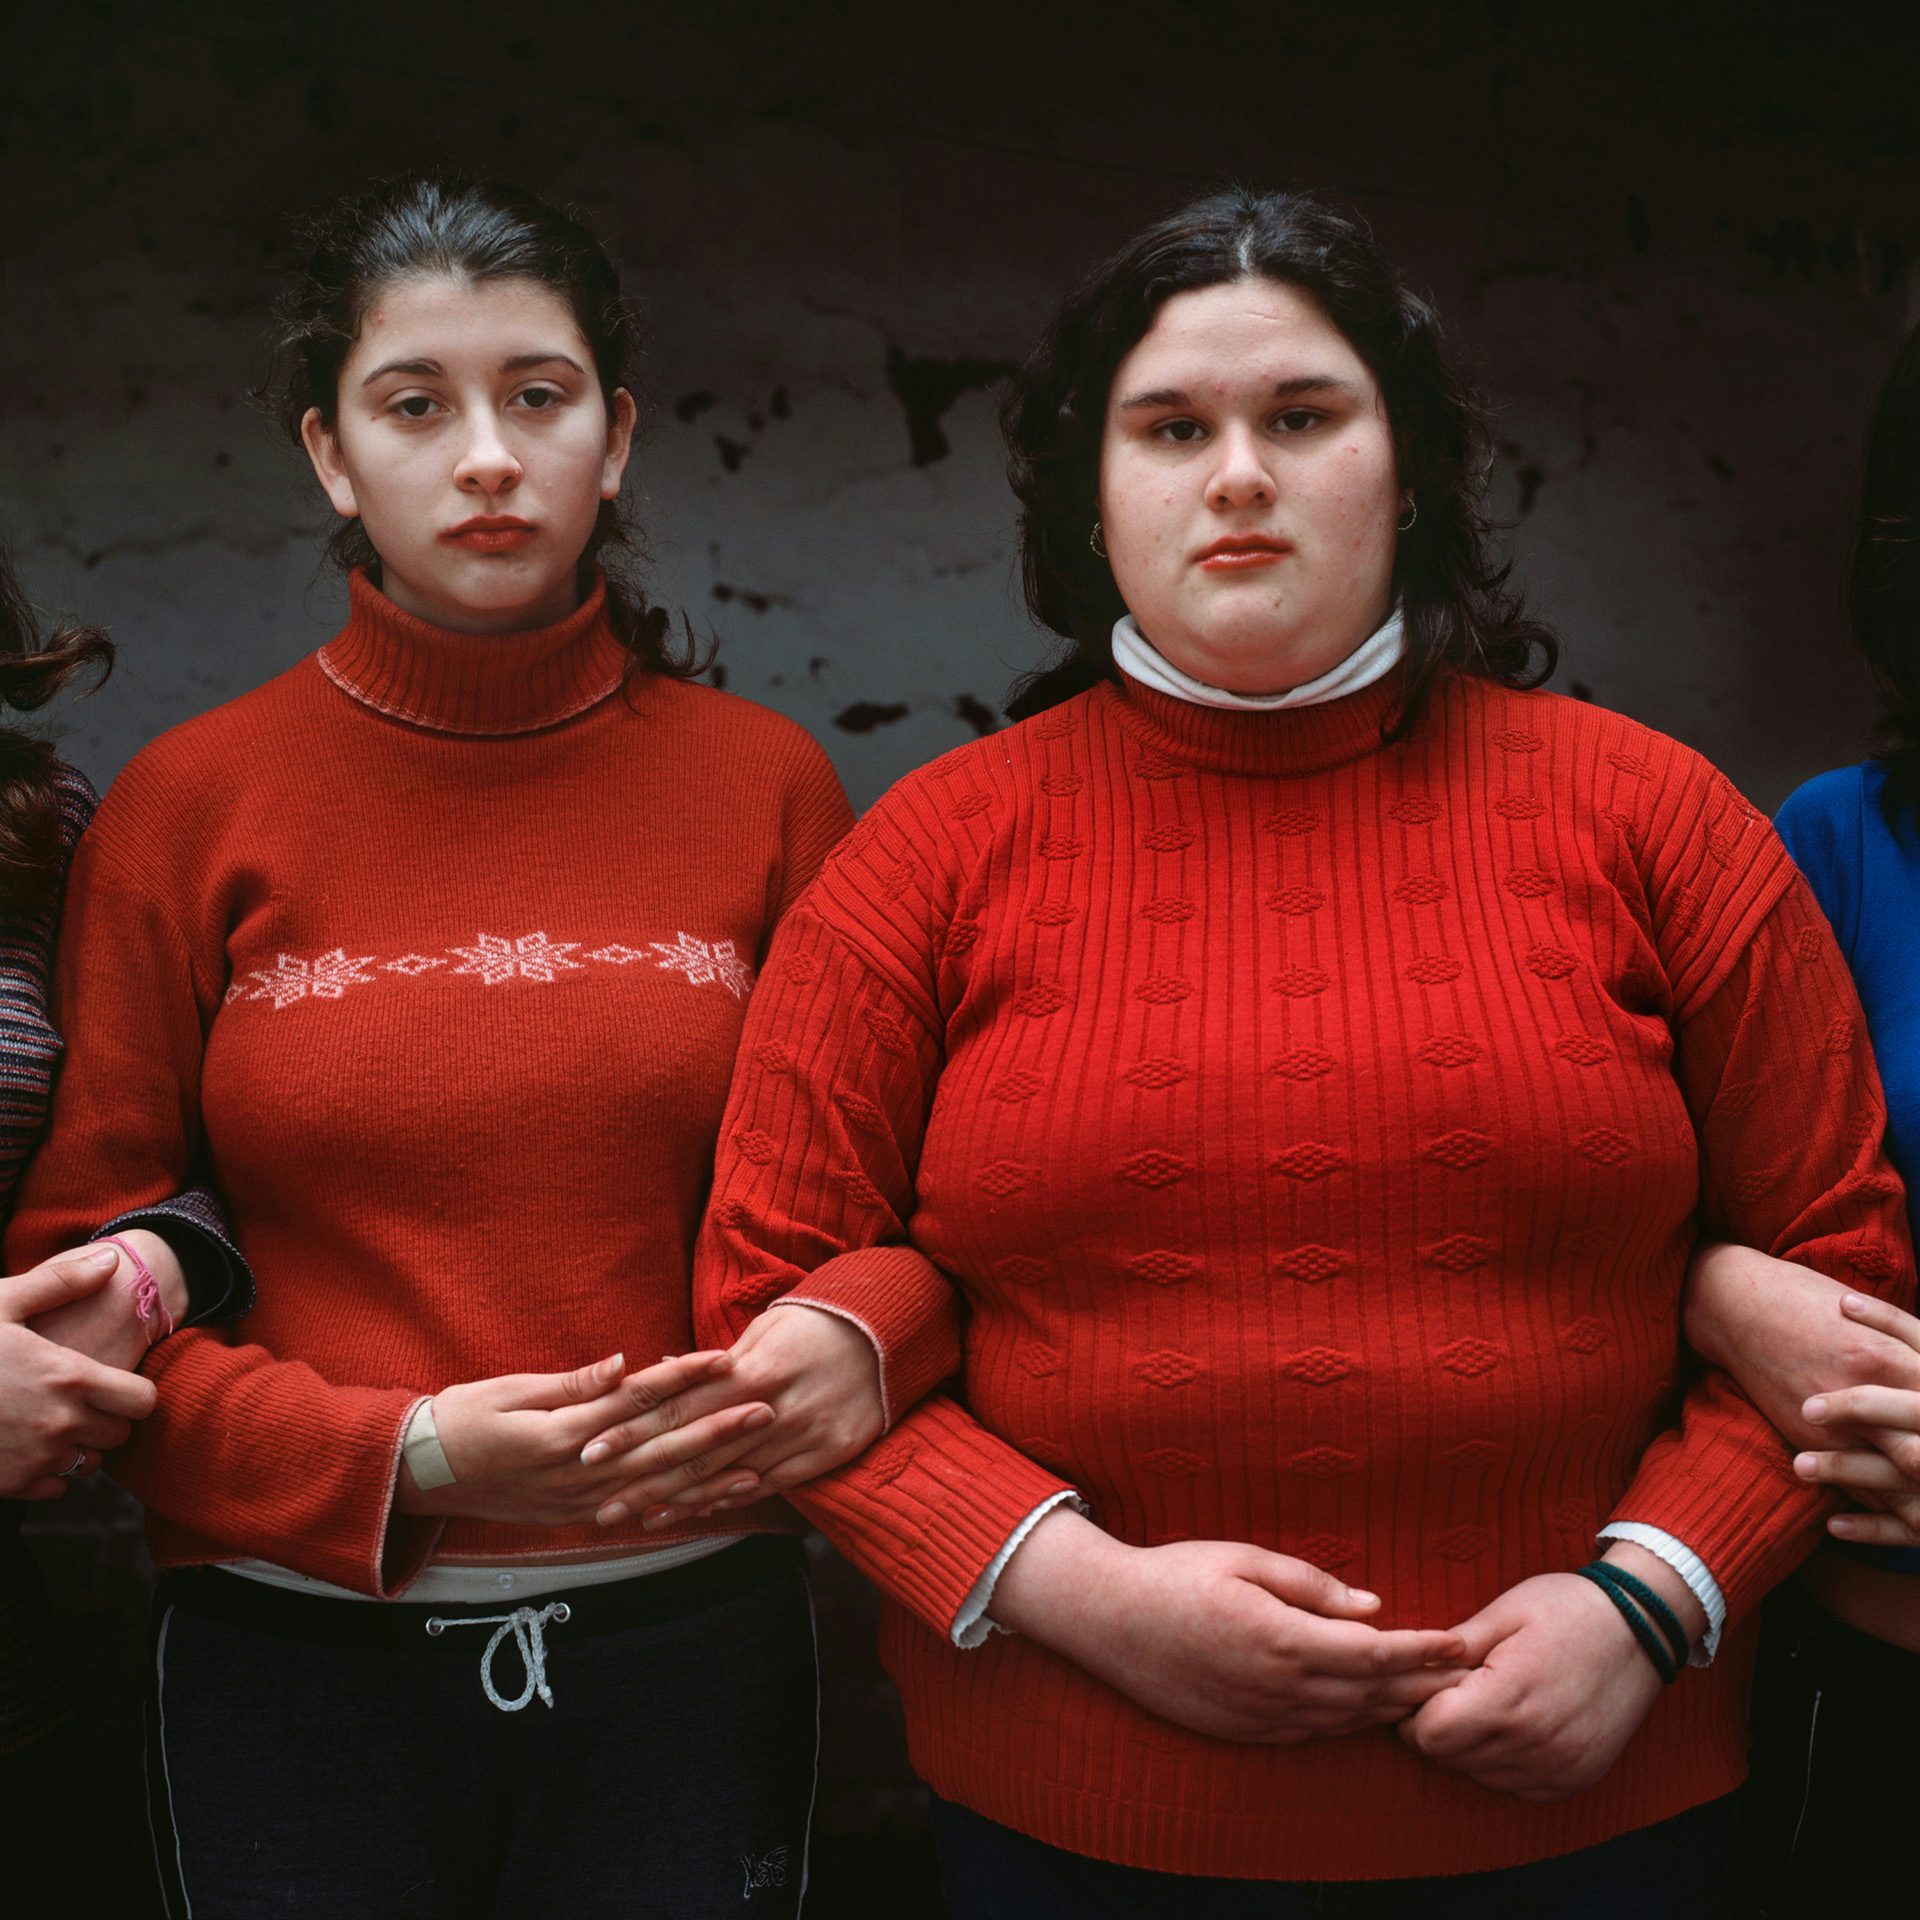 Photograph by Alessandra Sanguinetti of two girls with a slightly sombre expression wearing red jumpers and facing the camera